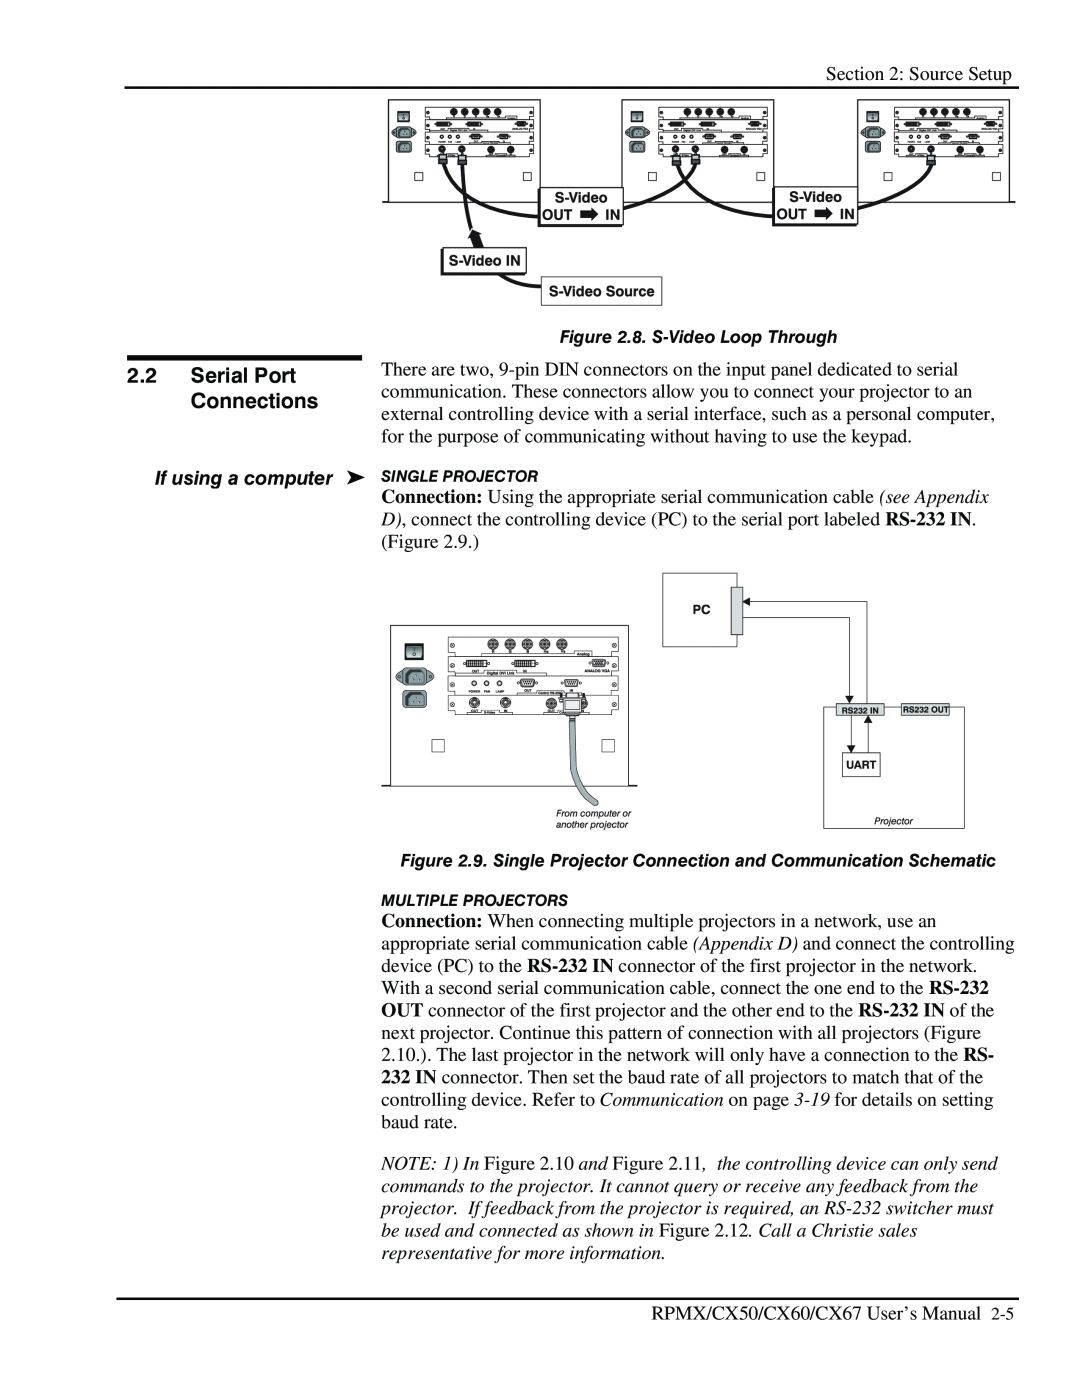 Christie Digital Systems CX67, CX50, CX60 user manual Serial Port Connections, If using a computer SINGLE PROJECTOR 